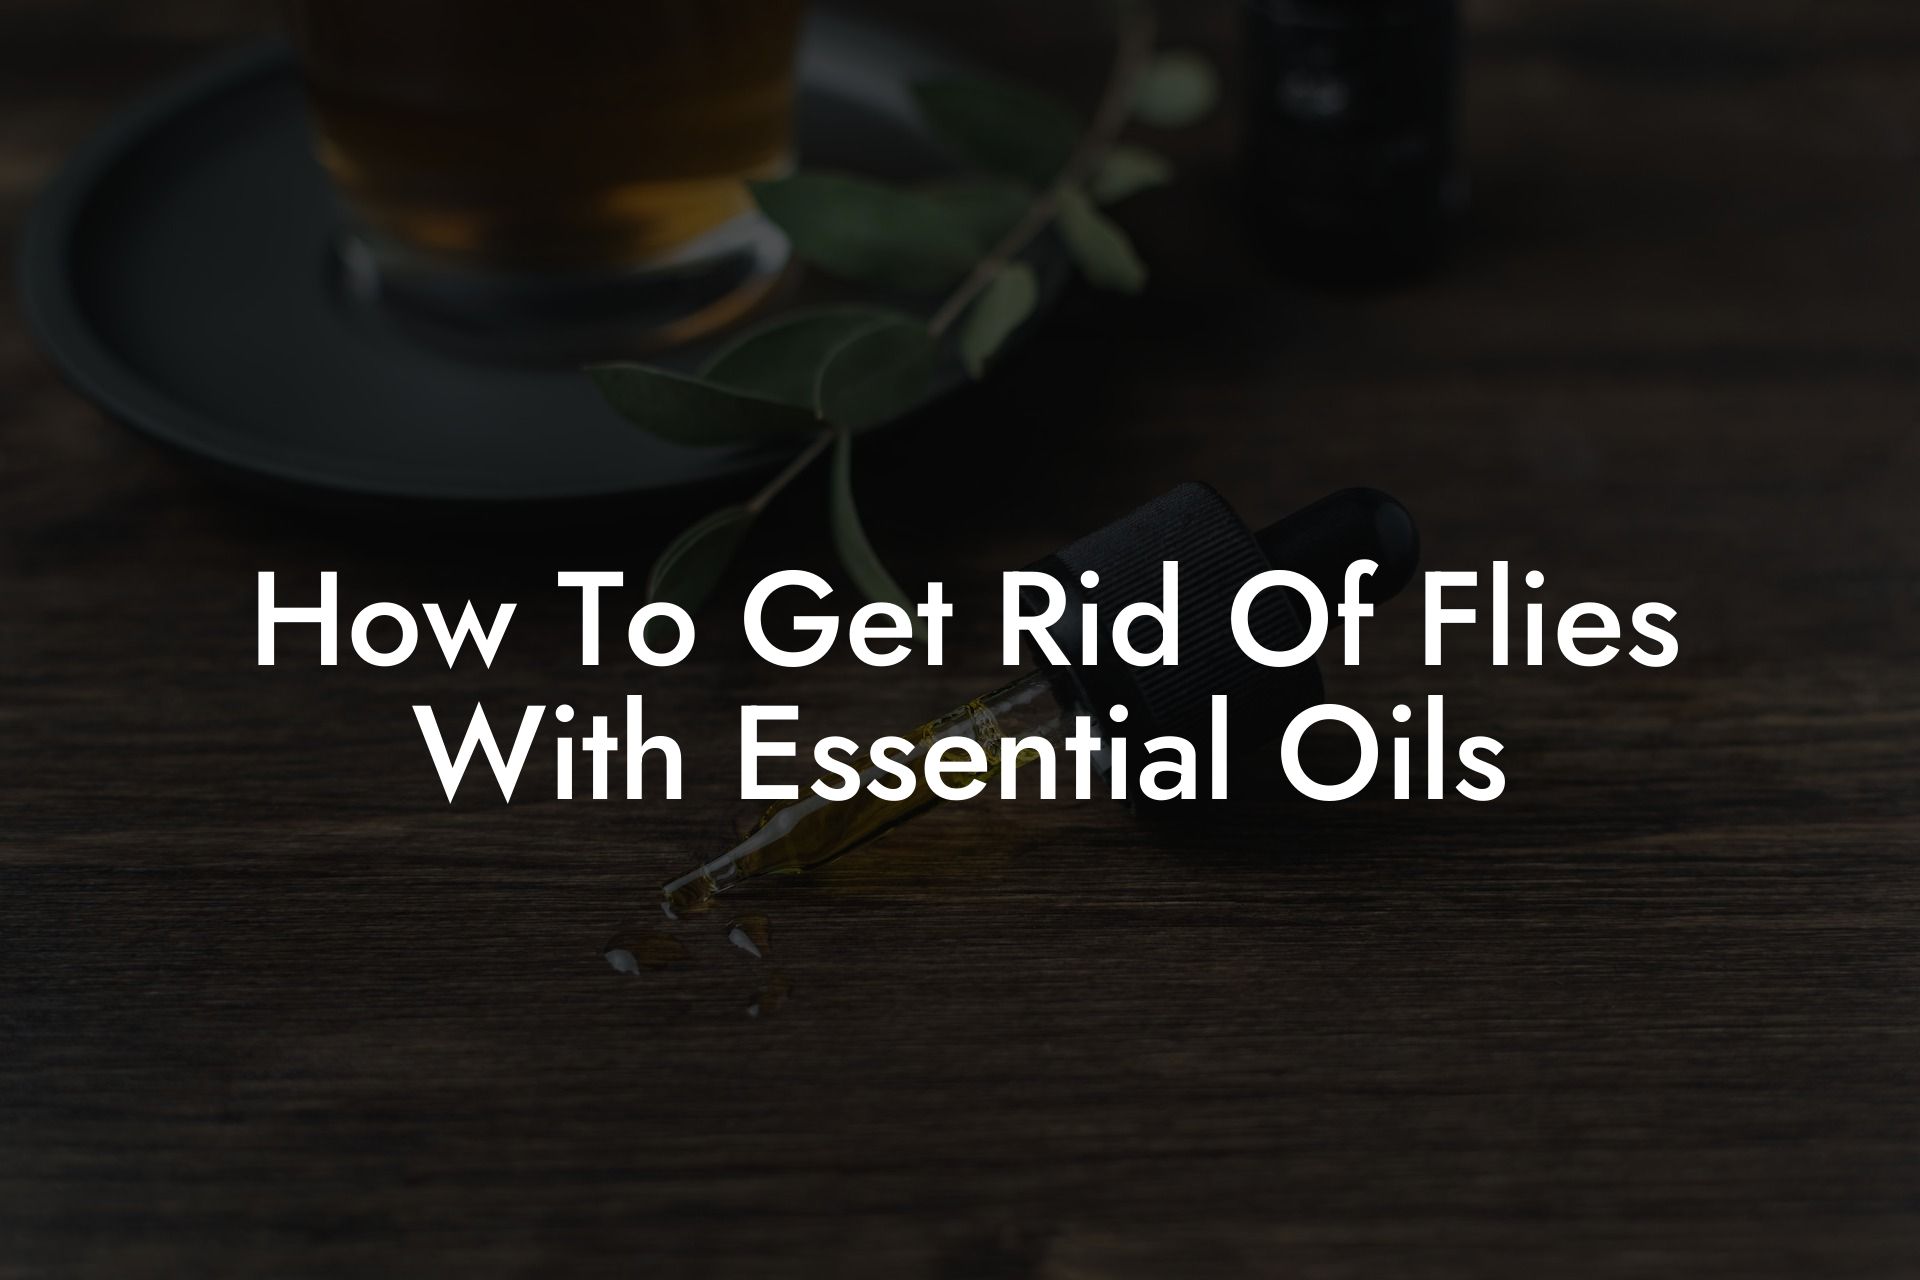 How To Get Rid Of Flies With Essential Oils